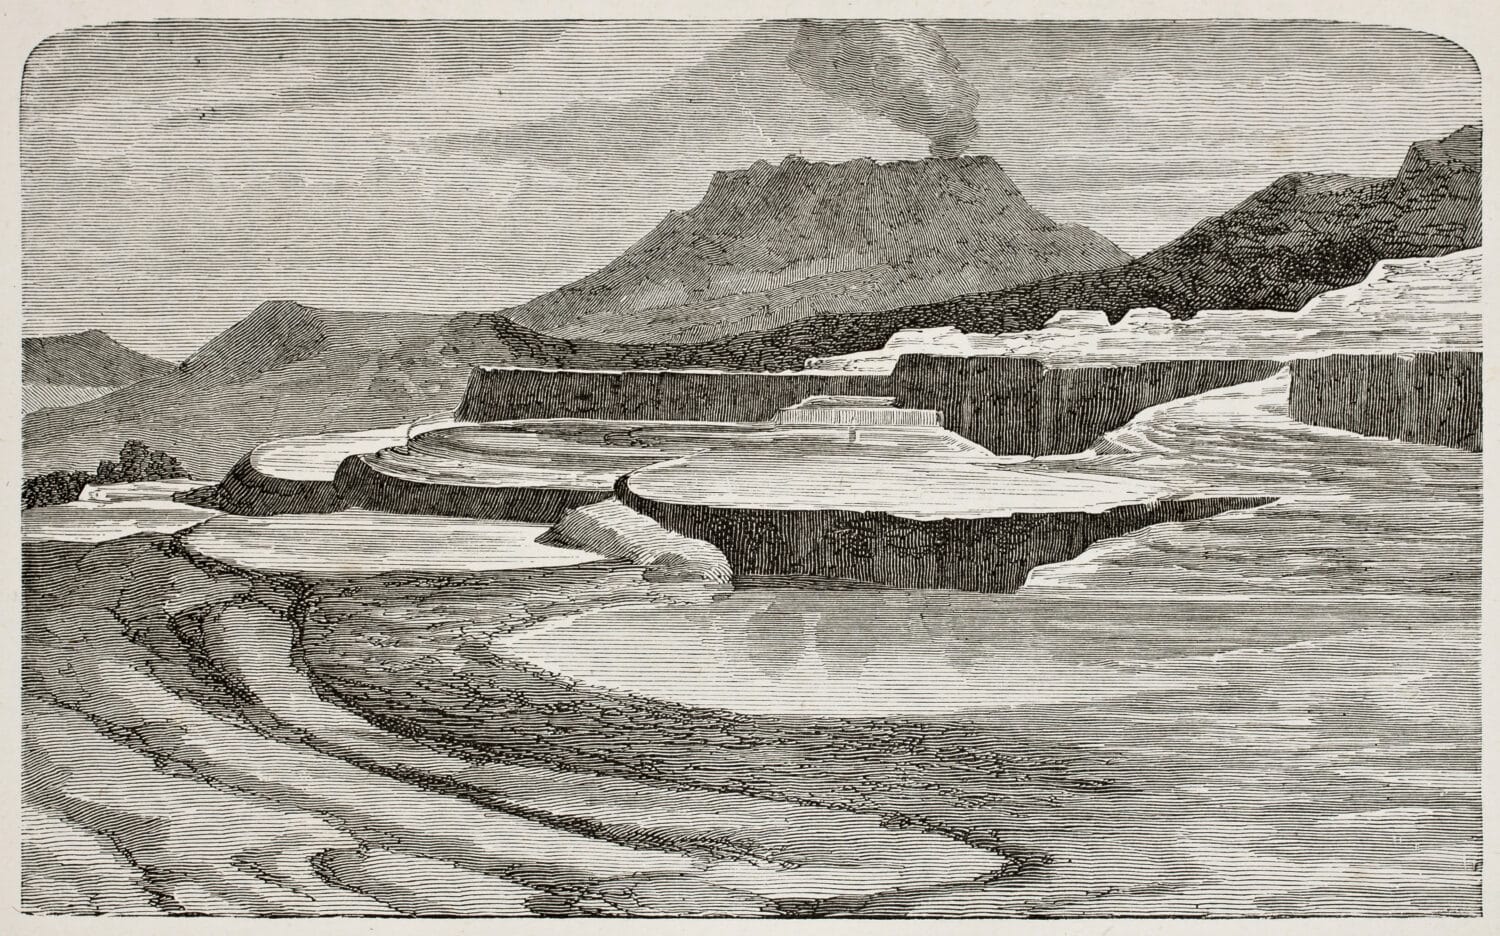 Old illustration of Te-Tarata (Pink and White Terraces, then buried by Mount Tawarera's eruption in 1886), New Zeland. By unknown author, published on L'Eau, by G. Tissandier, Hachette, Paris, 1873